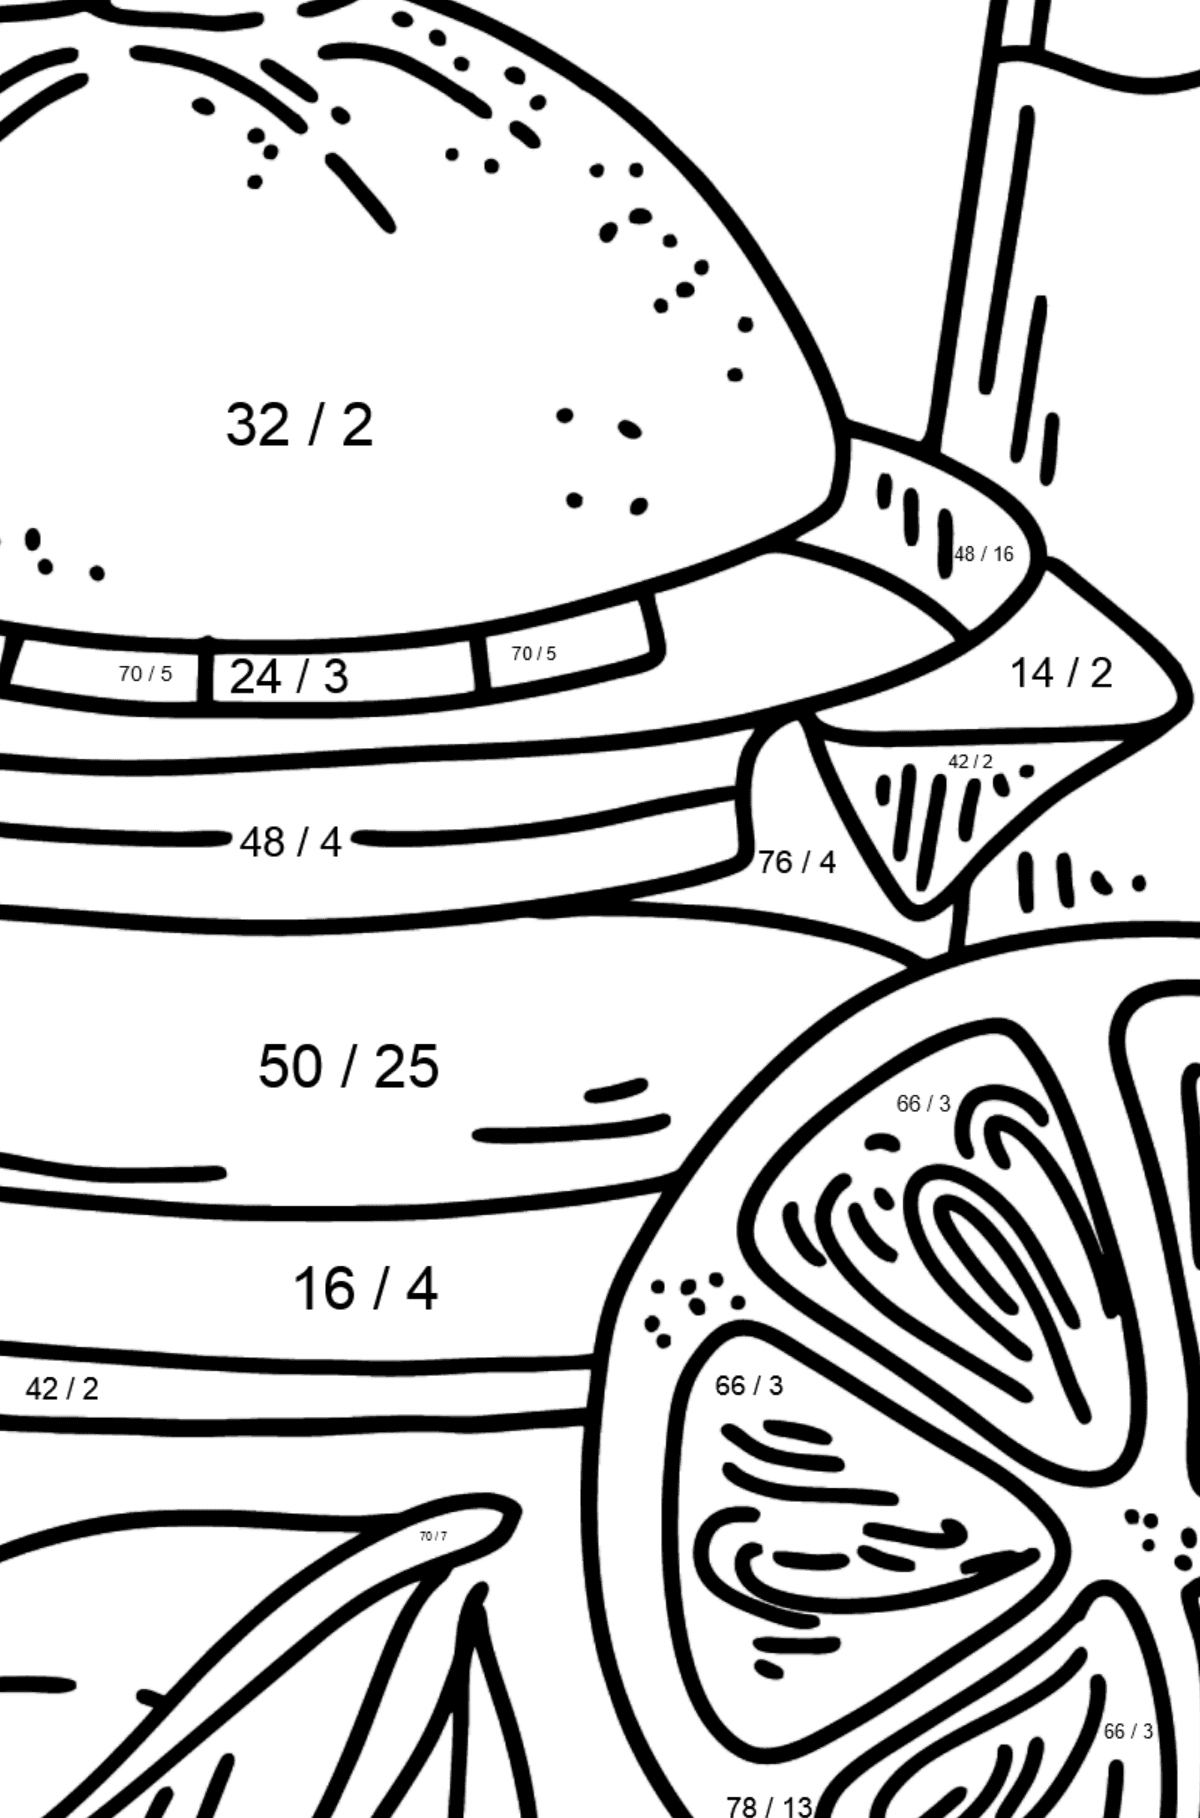 Orange Juice coloring page - Math Coloring - Division for Kids